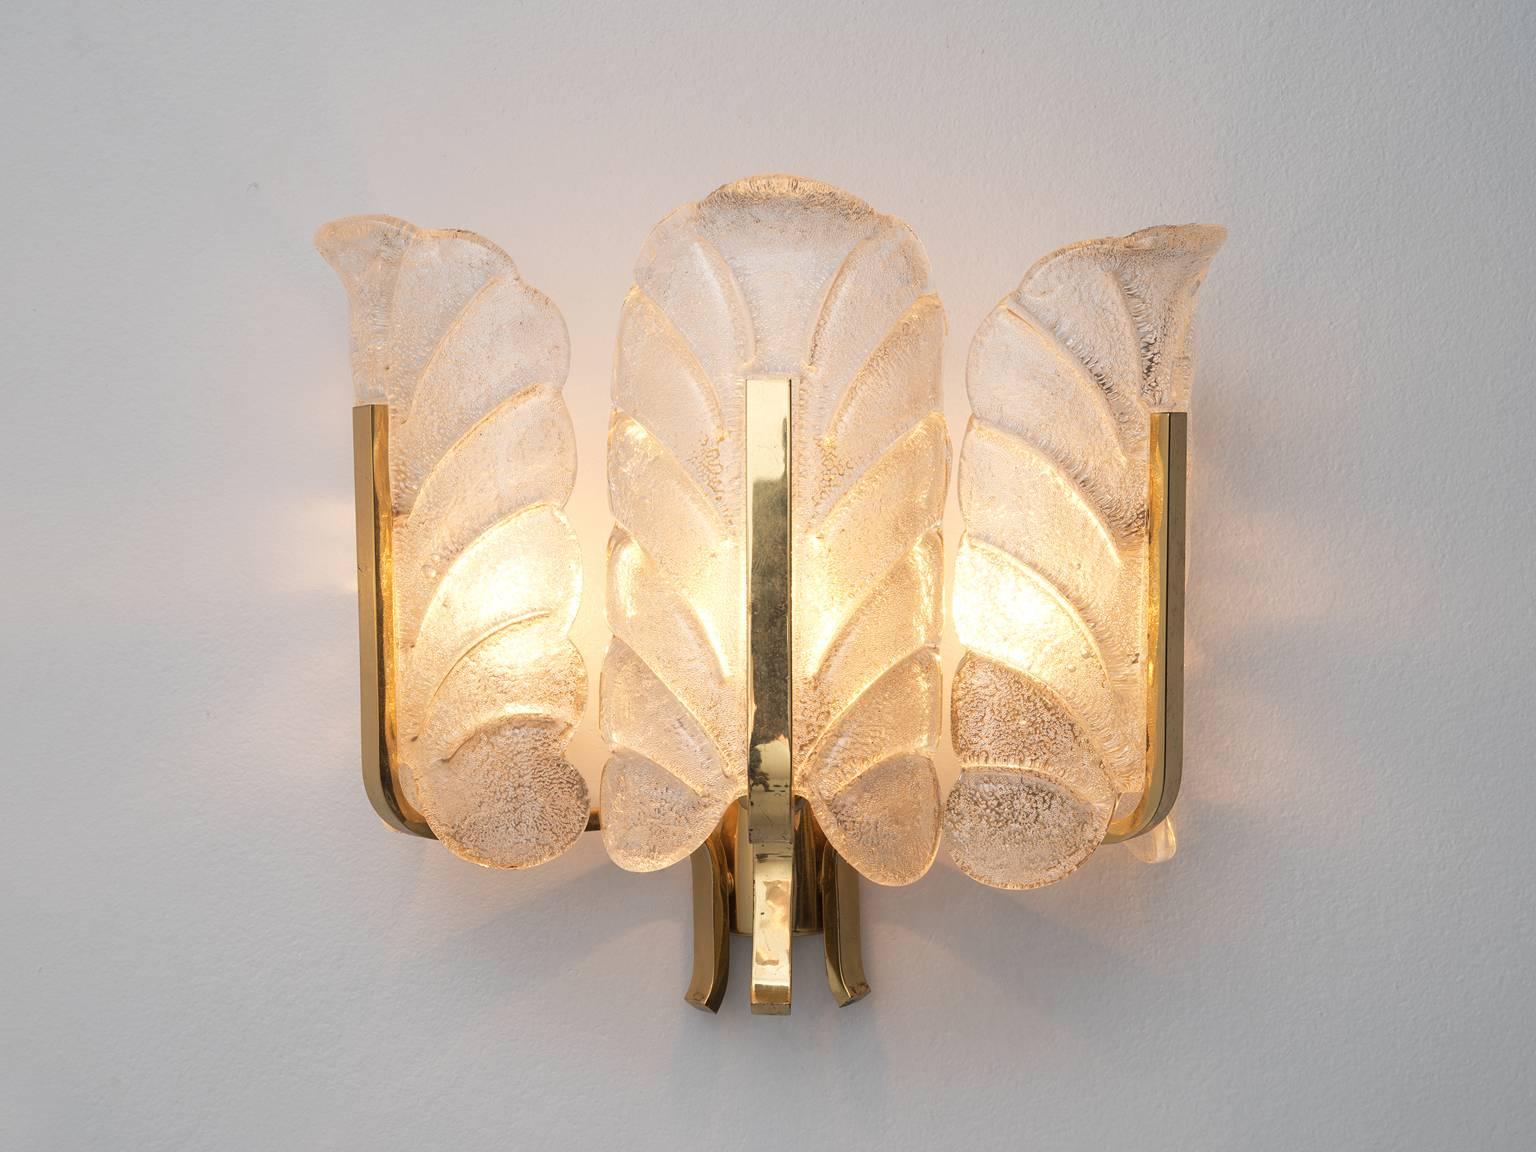 European Set of 12 Wall Lights in Brass and Structured Glass